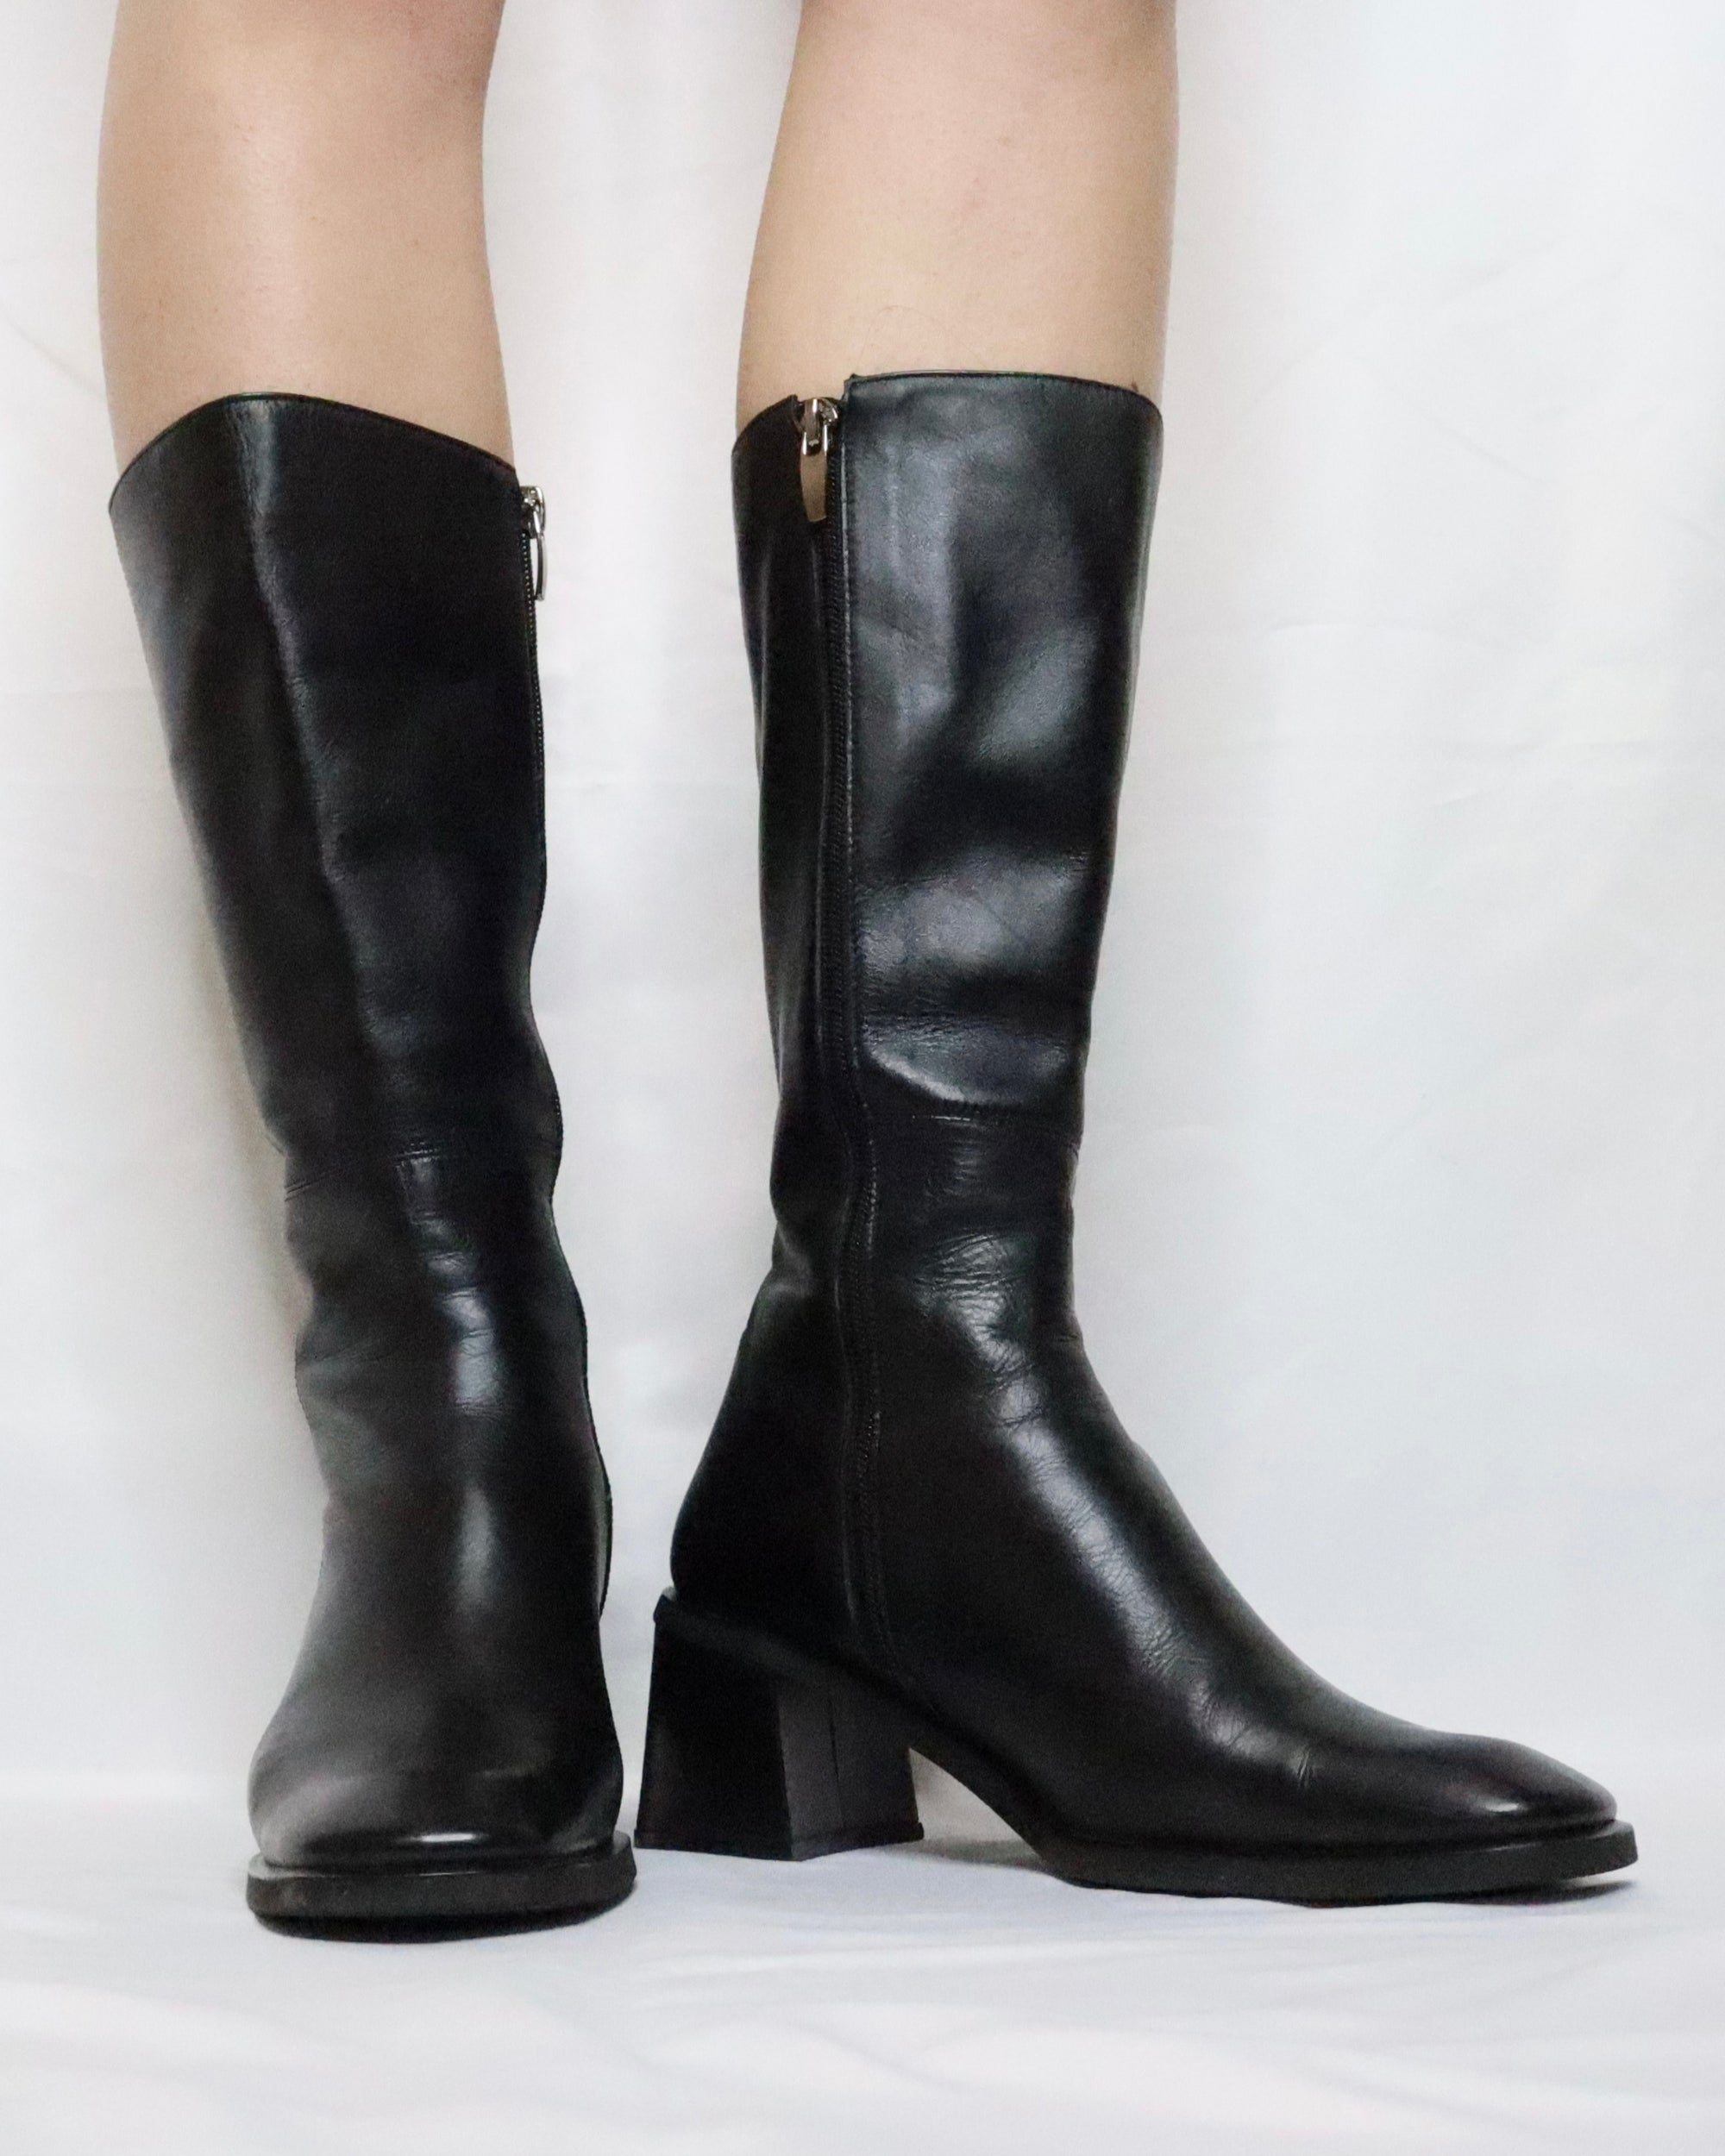 Black Leather Knee High Boots (6.5 US) 